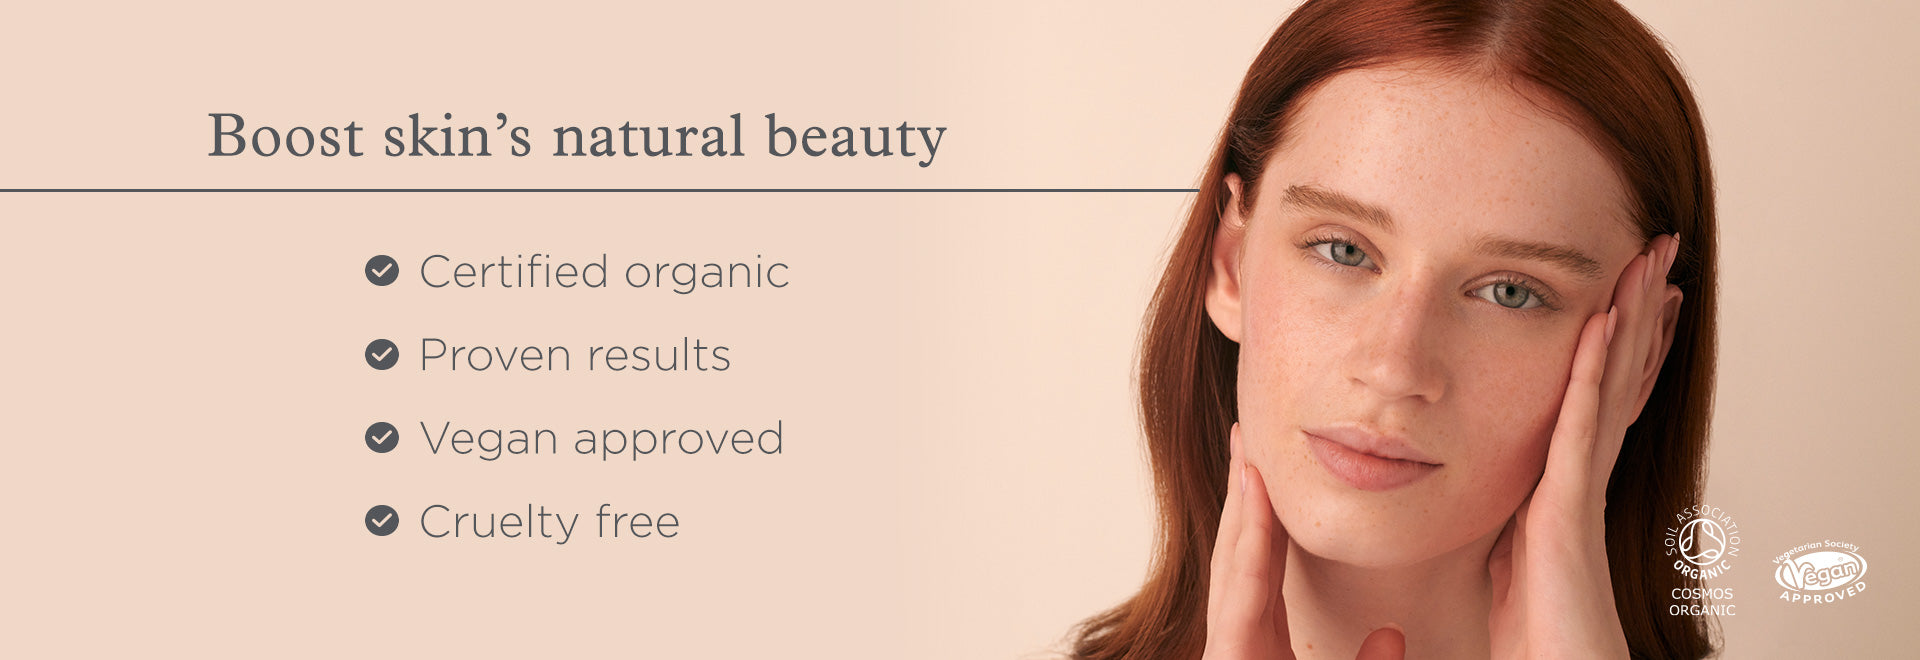 Boost skin's natural beauty with our new Skincare Boosters | Neal's Yard Remedies